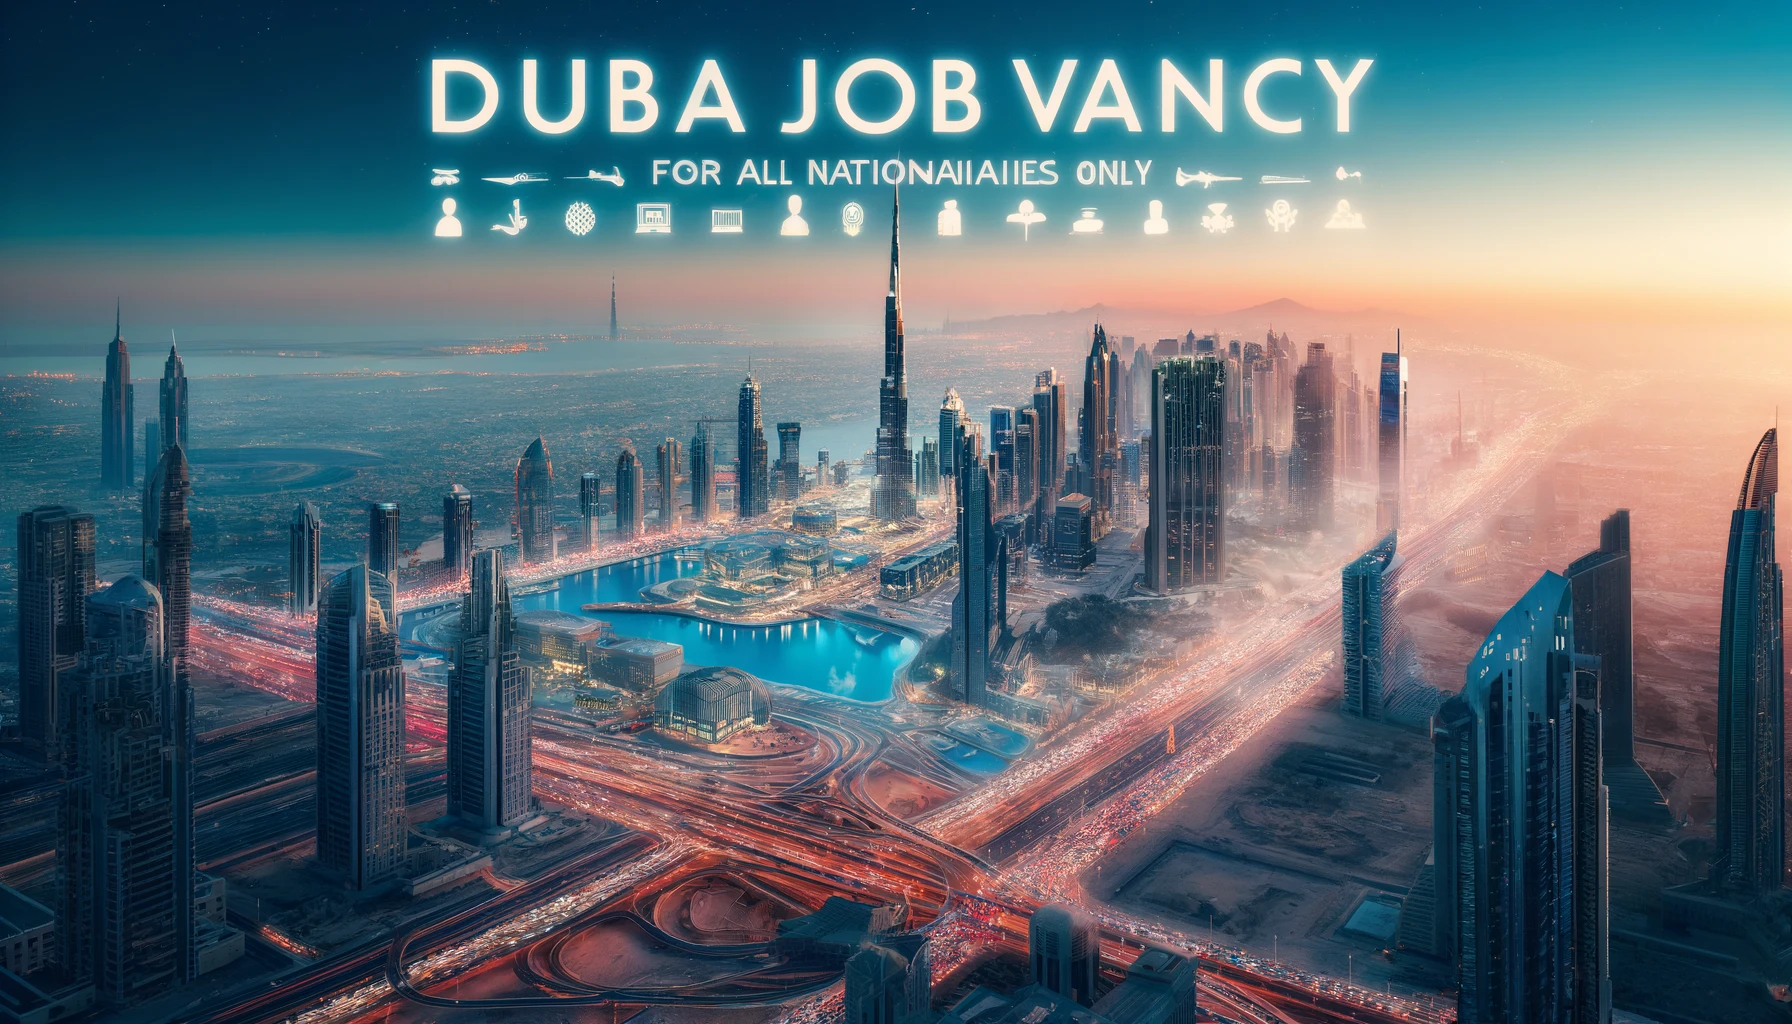 Dubai job vacancy for all nationalities (Males only)